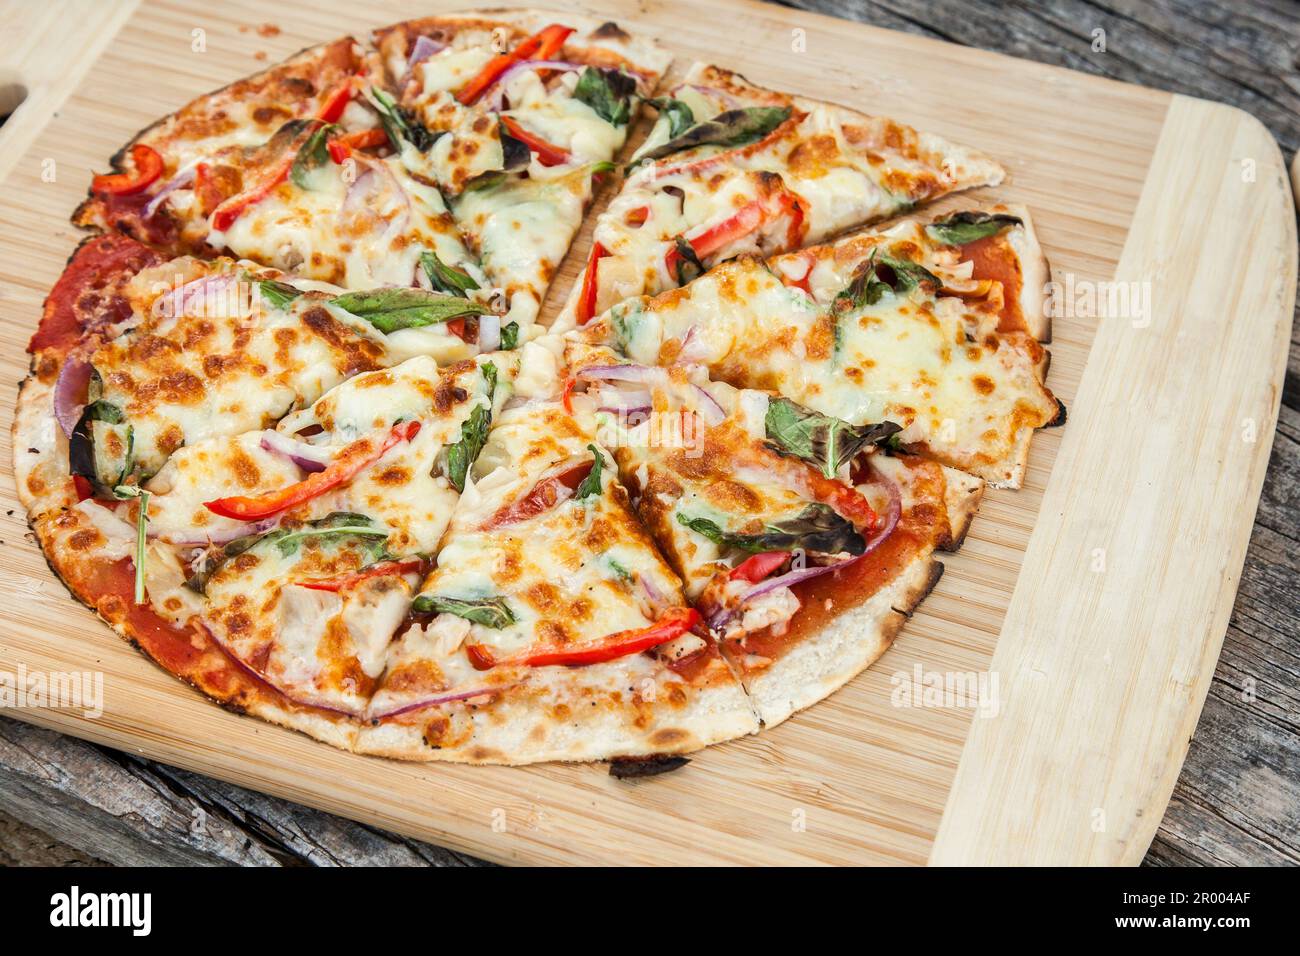 Fresh home made pizza from outdoor pizza oven on serving board Stock Photo